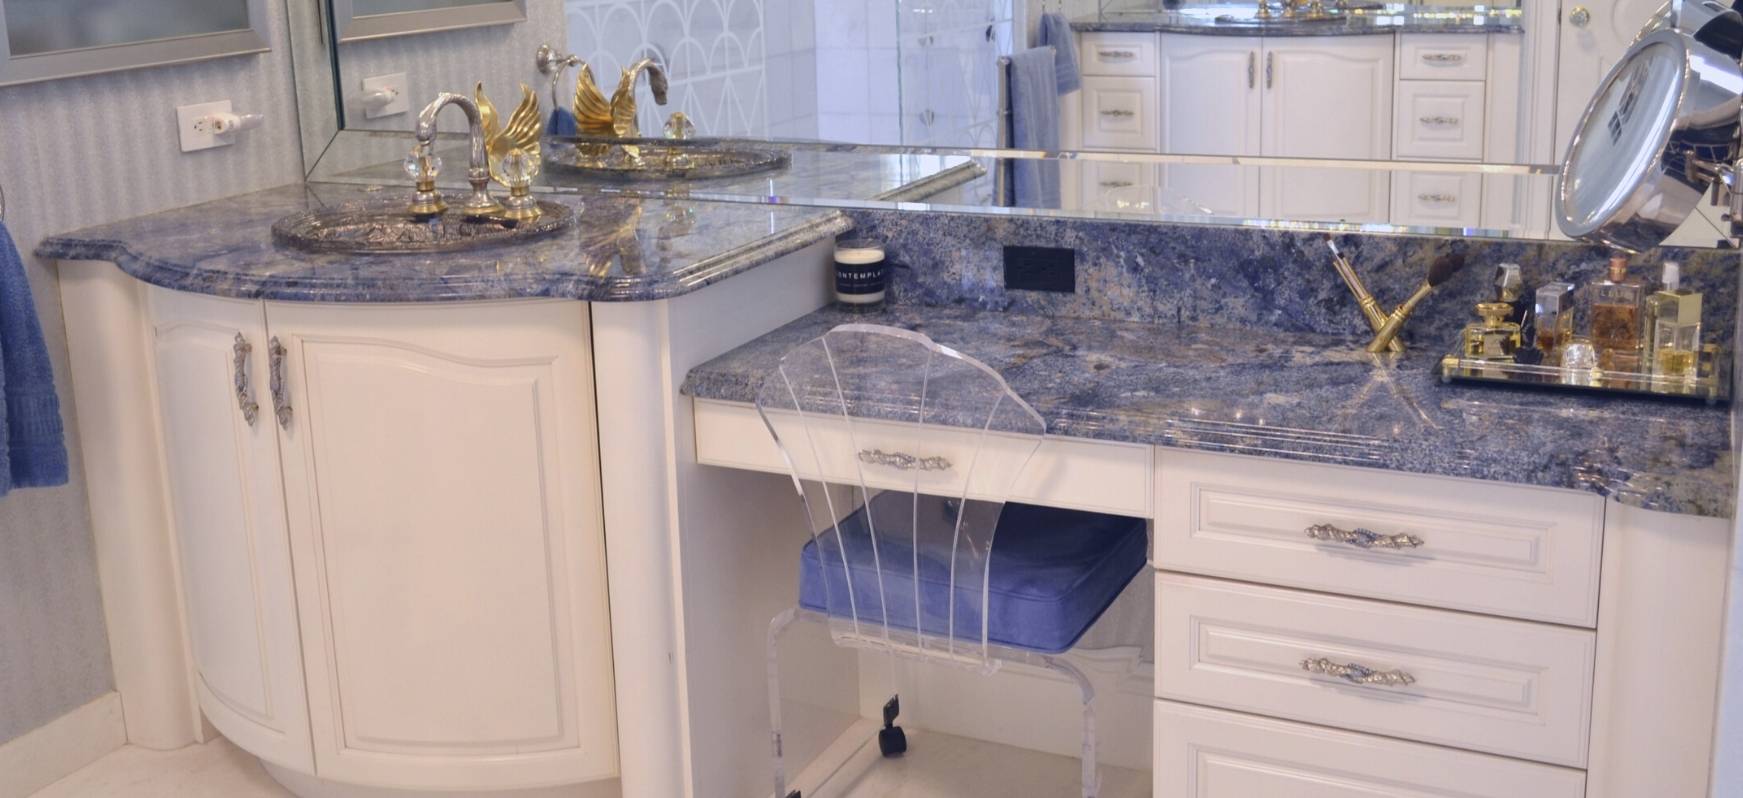 Blue Bahia Bathroom Countertops with White Cabinets and Gold Accents Blue Countertops